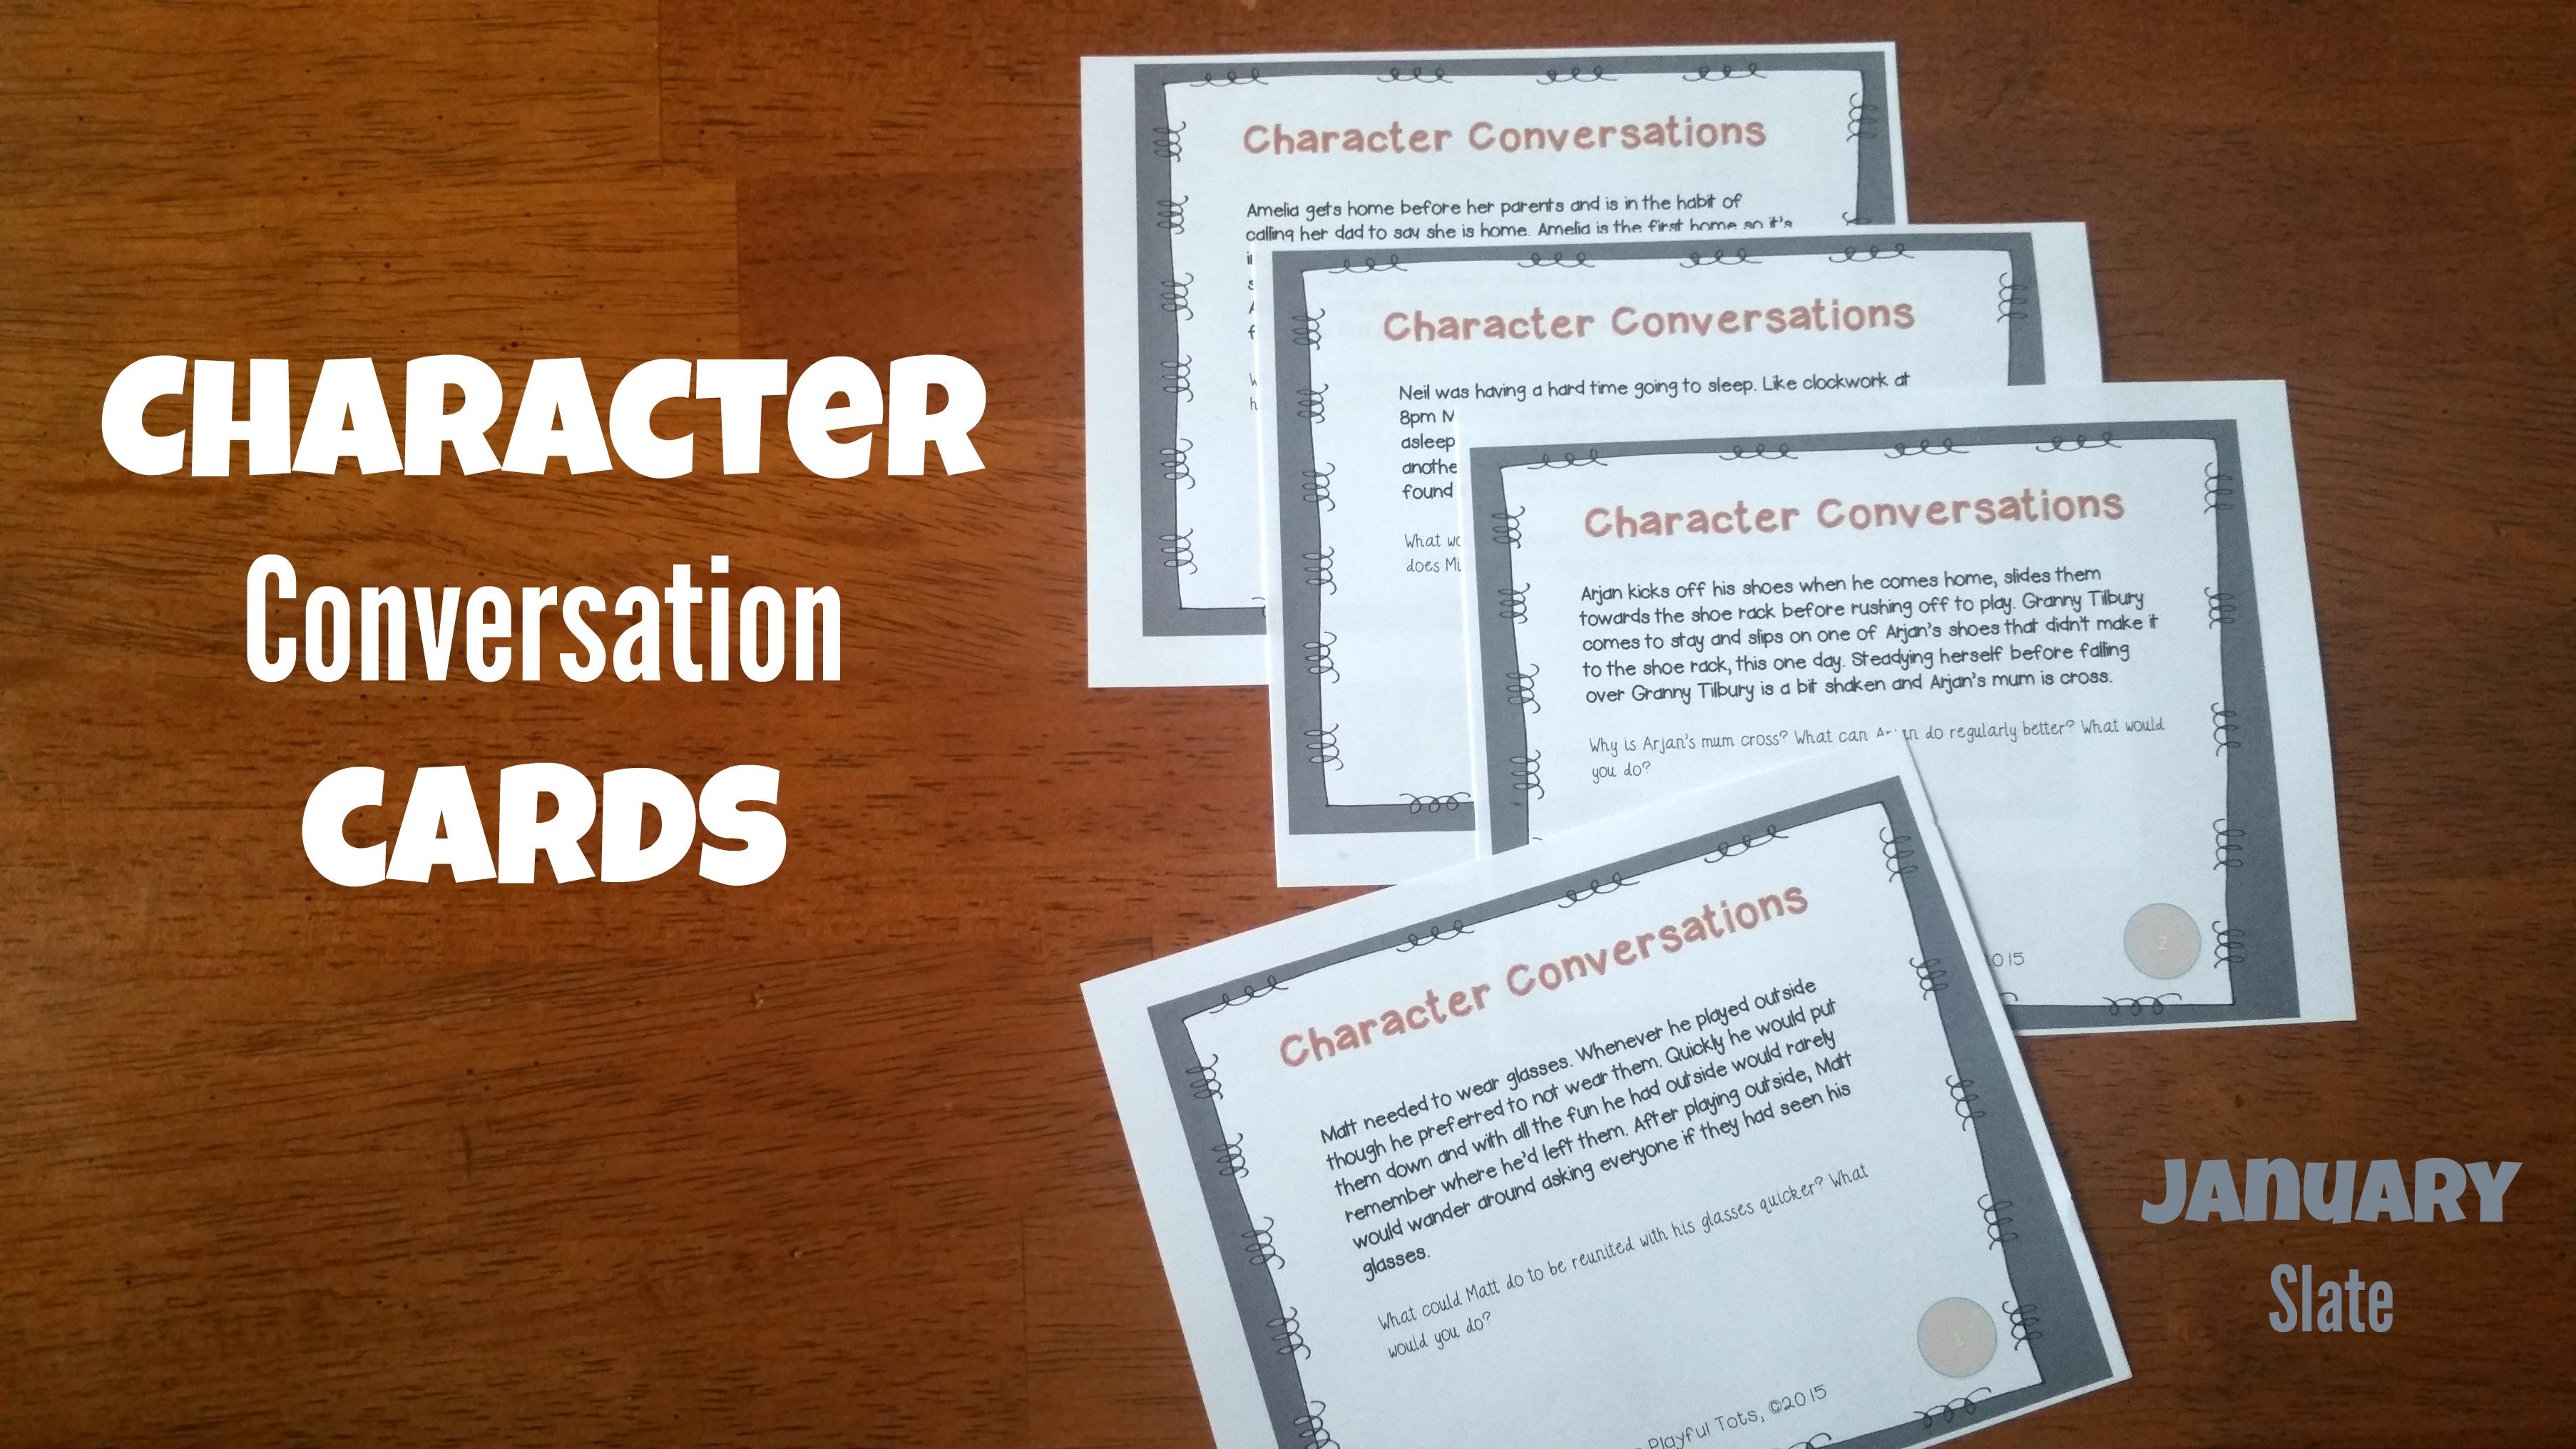 Audio version of Developing habits, goal setting, unity and cooperation character conversation task cards